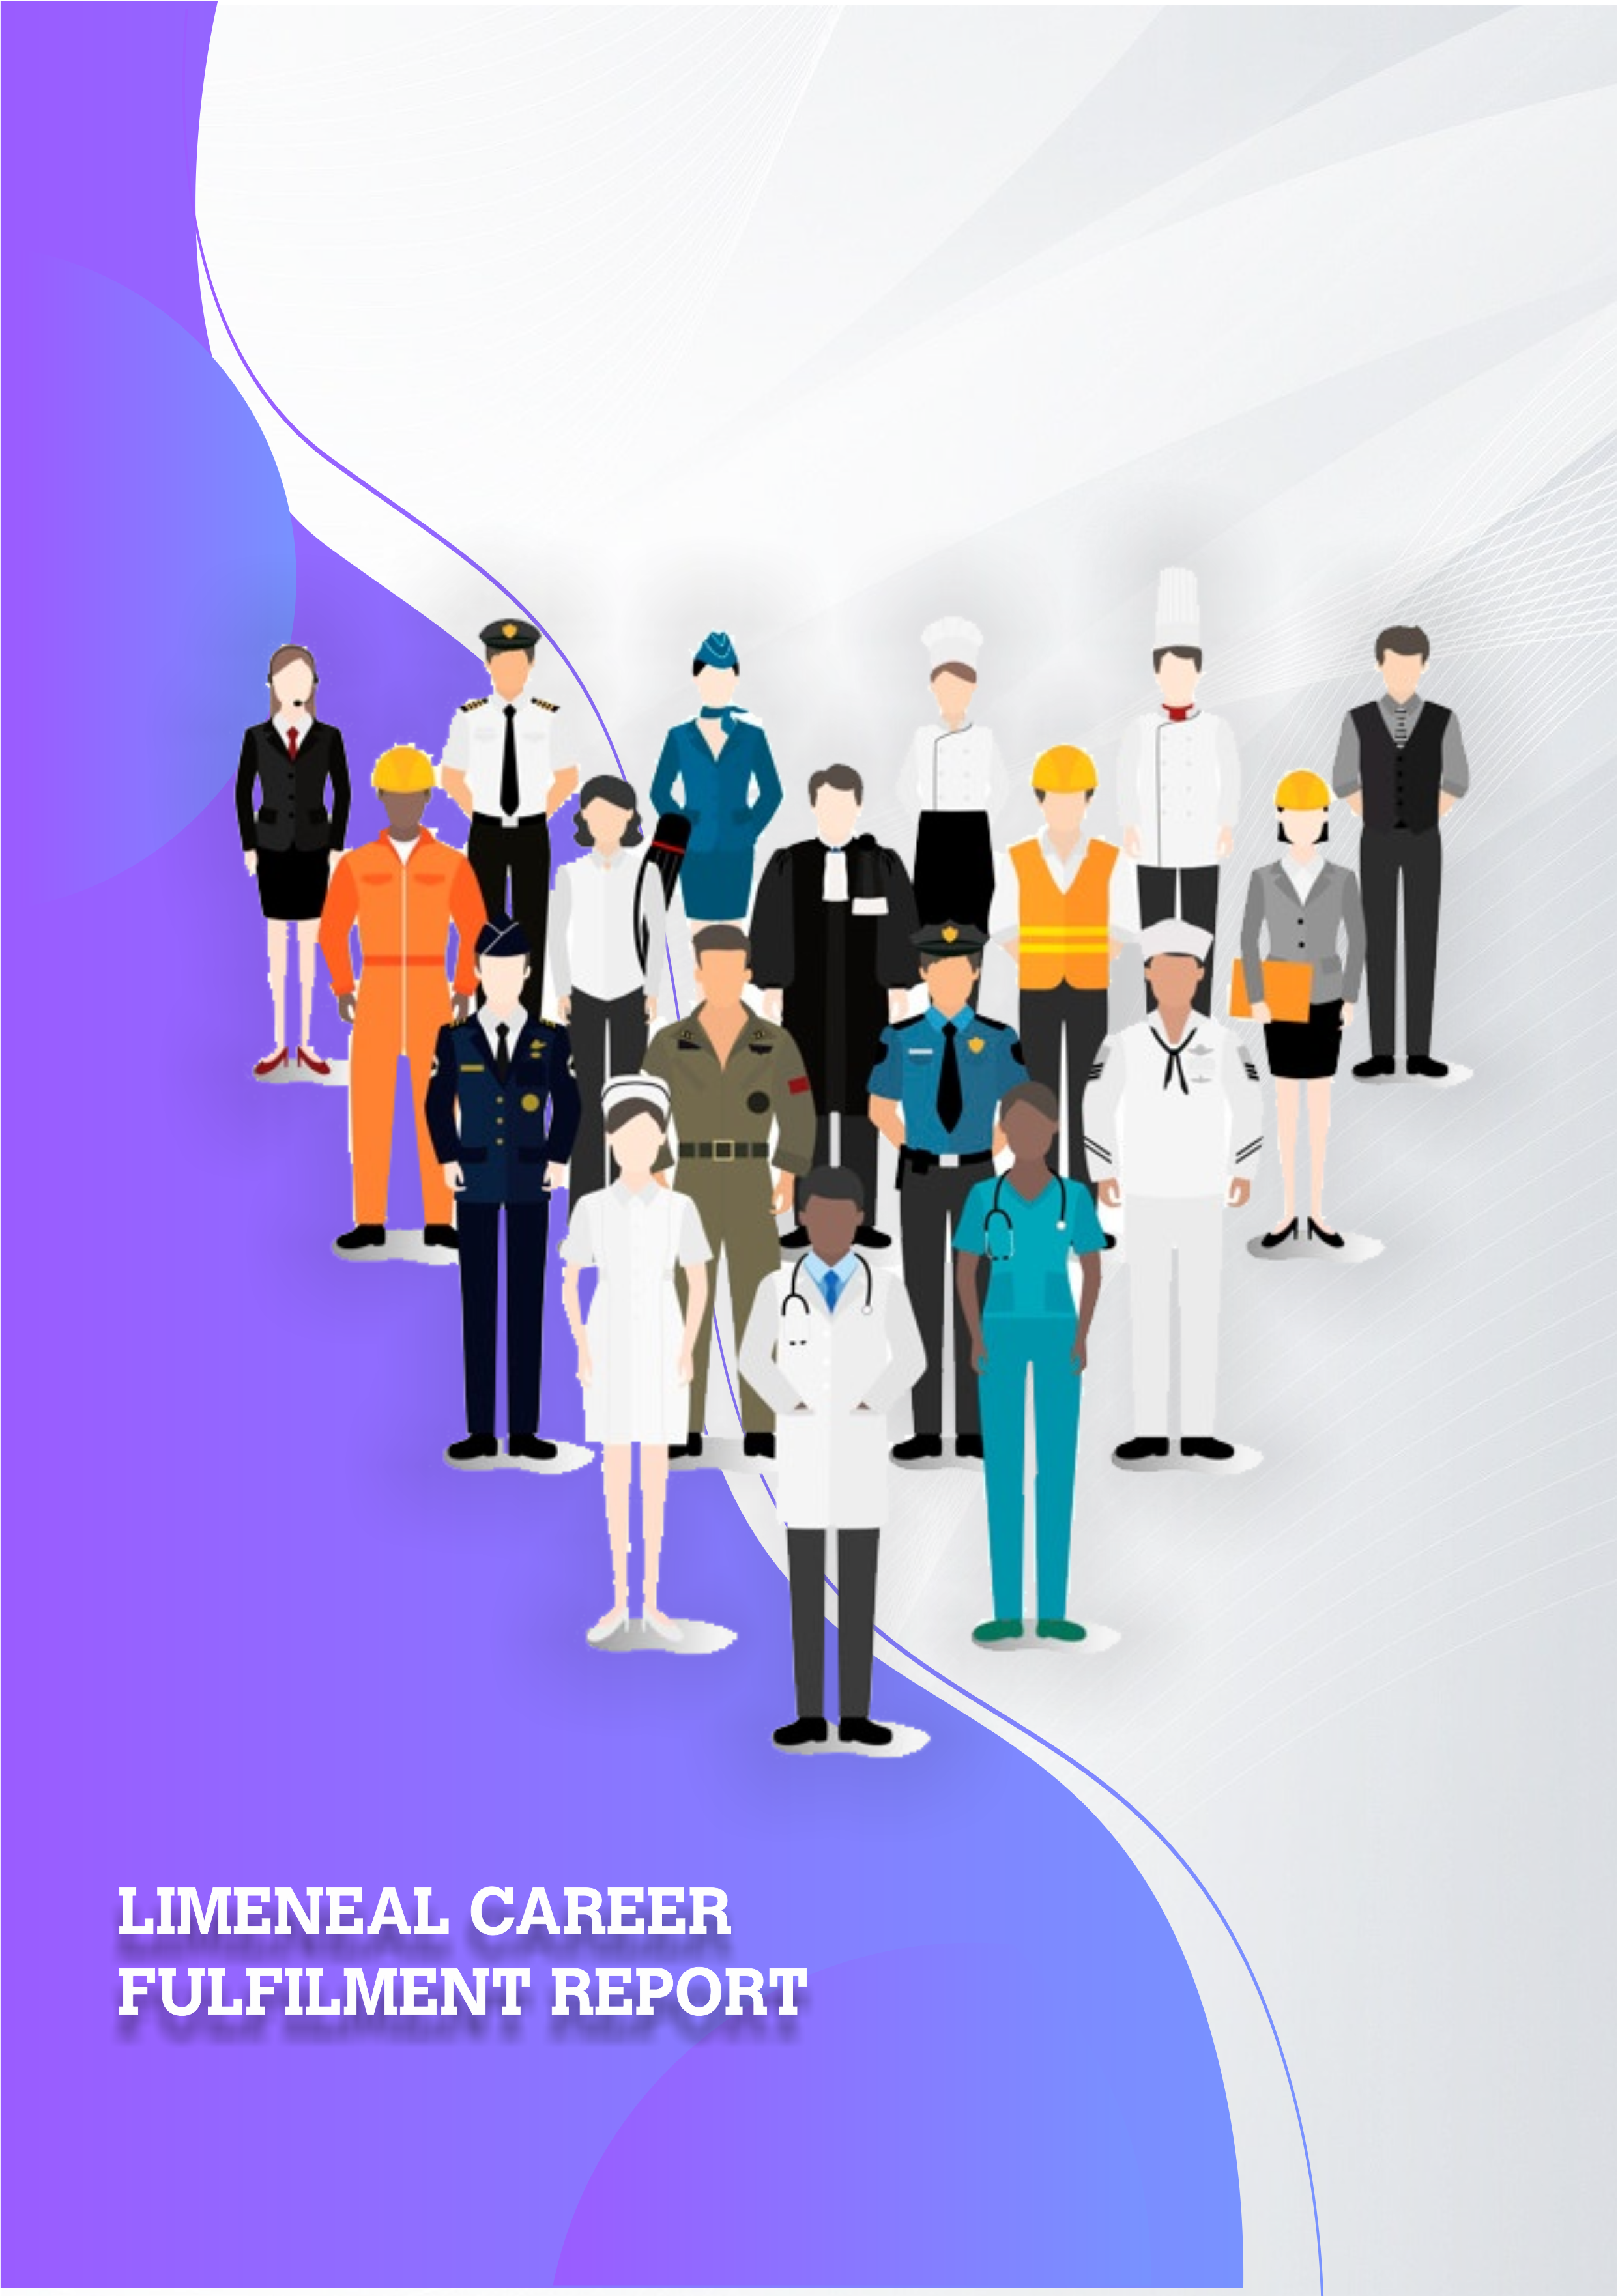 Career Coverpage designs